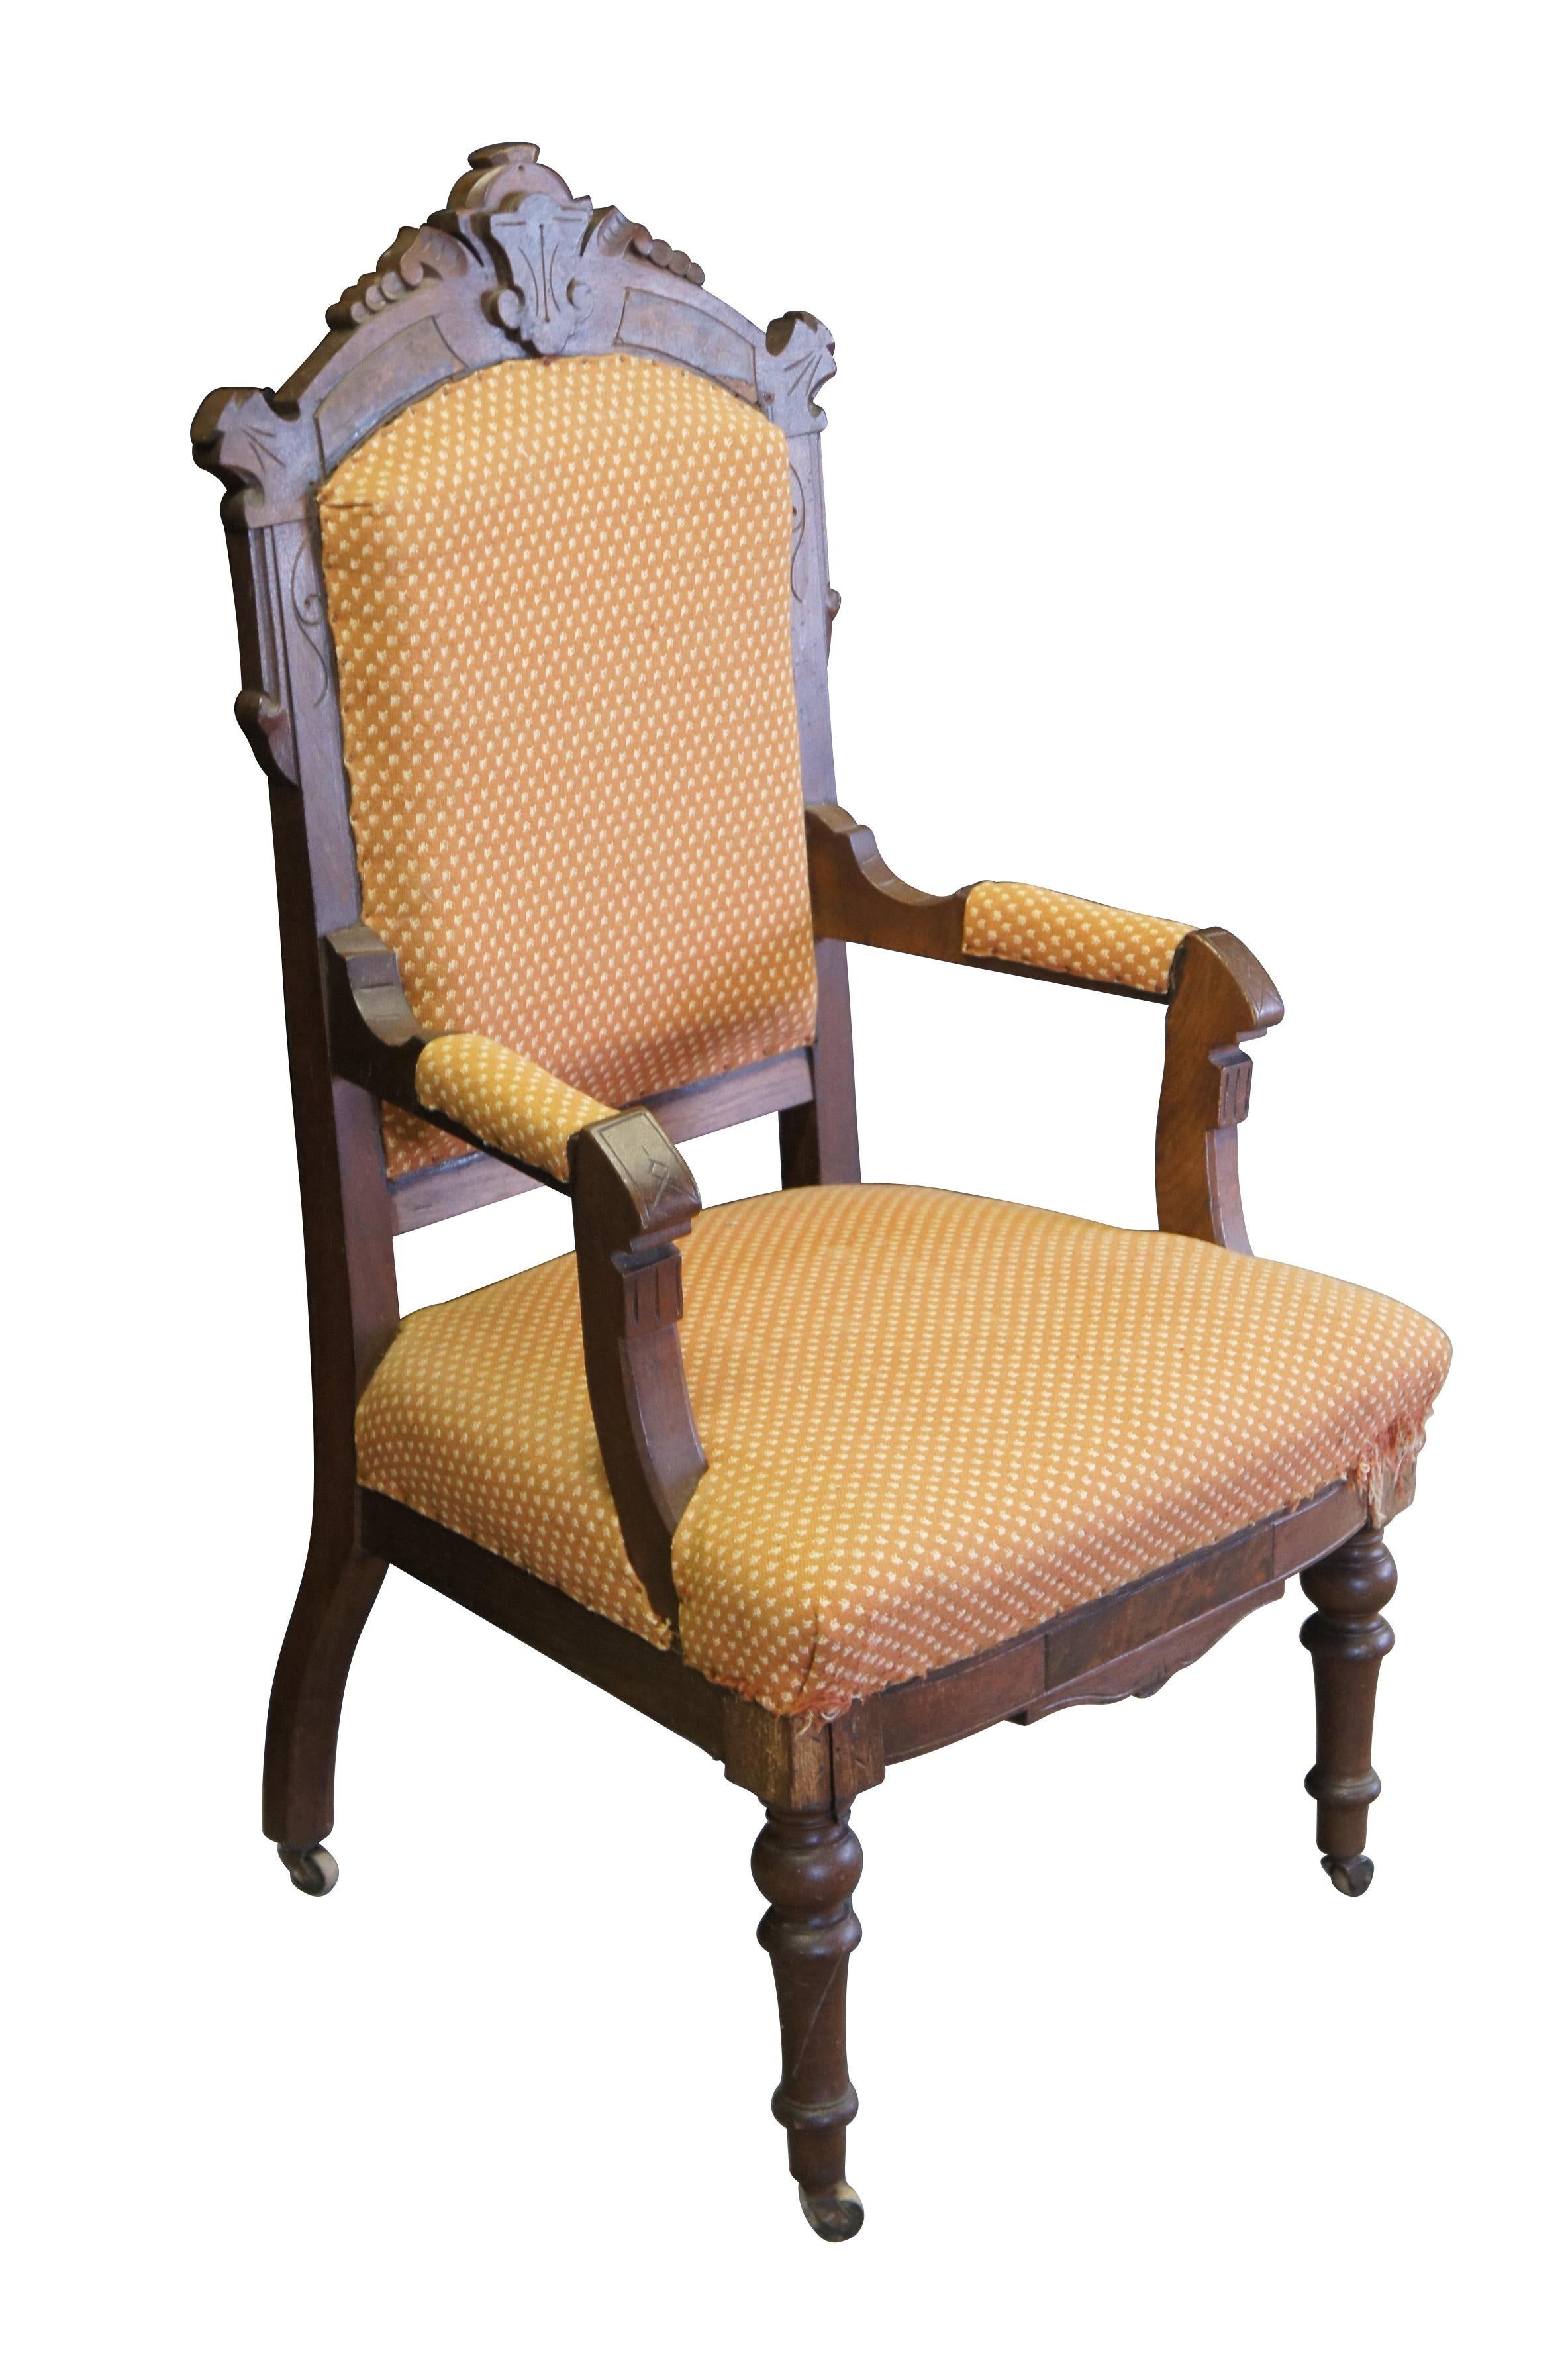 Antique Victorian parlor armchair.  Made of walnut featuring Eastlake styling with carved frame, fauteuil arms and turned legs with castors. 

Dimensions:
23